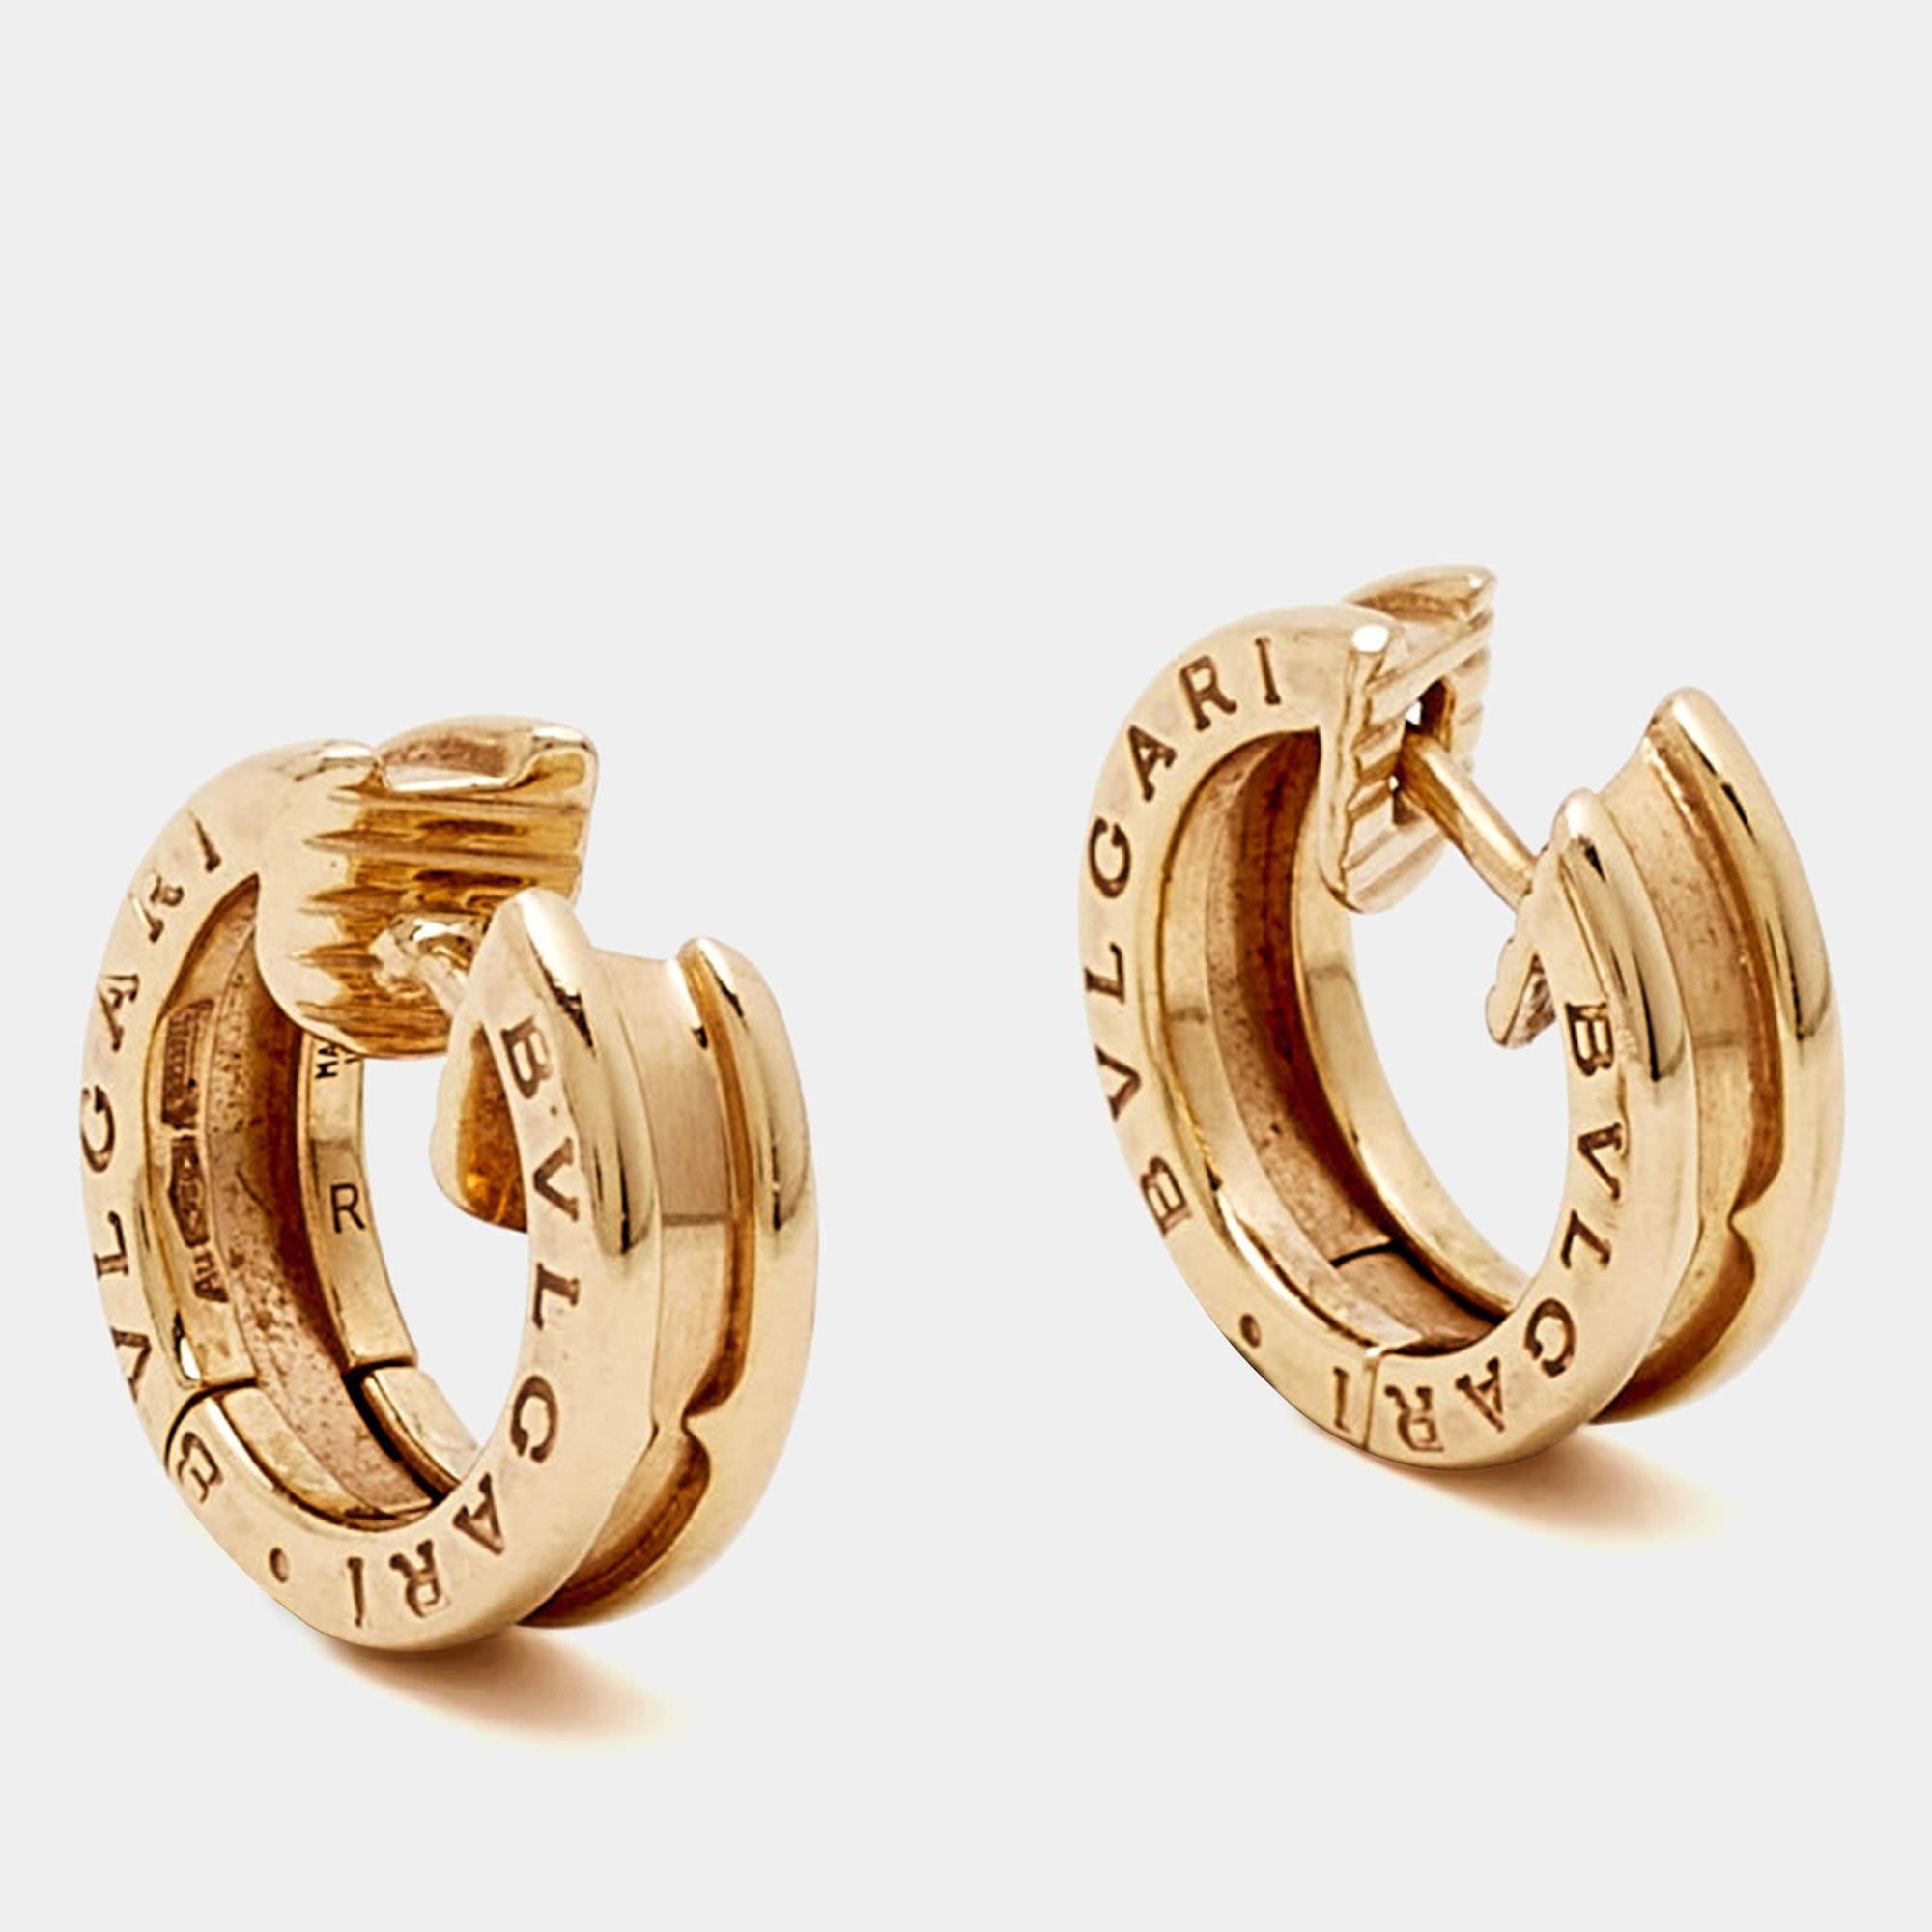  This pair of earrings is from Bvlgari's B.Zero1 collection, crafted from 18k rose gold as hoops and beautifully detailed with the brand's signature engravings. The collection has been designed by blending inspiration from the Colosseum with modern